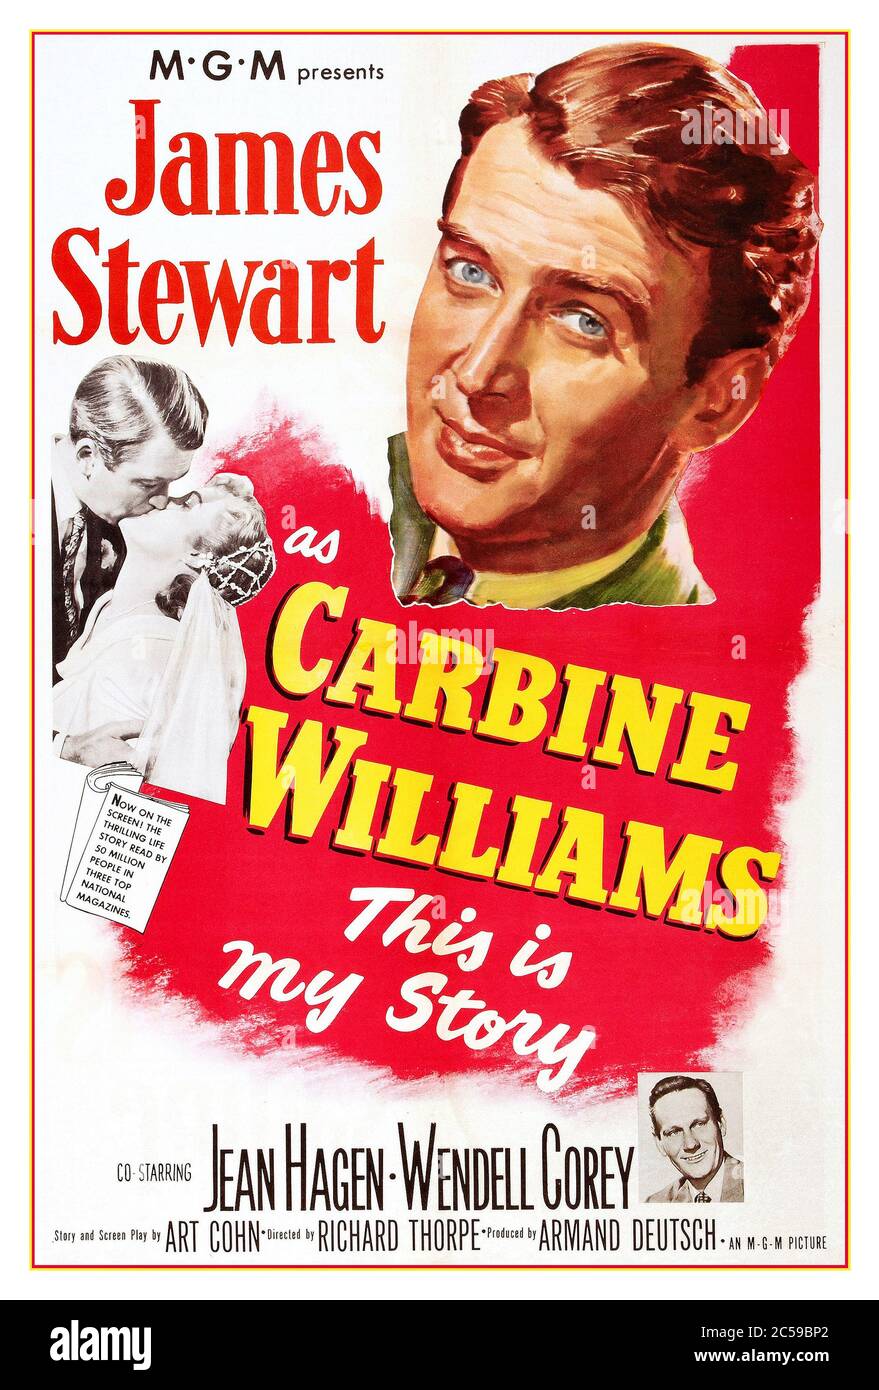 Vintage Movie Film Poster Carbine Williams (1952) starring James Stewart   Also Stars: Jean Hagen, Wendell Corey Directed by Richard Thorpe. David Marshall Williams is sent to a prison farm where he works in the tool shop and eventually develops the precursor of the famous M-1 Carbine automatic rifle used in World War II. Stock Photo